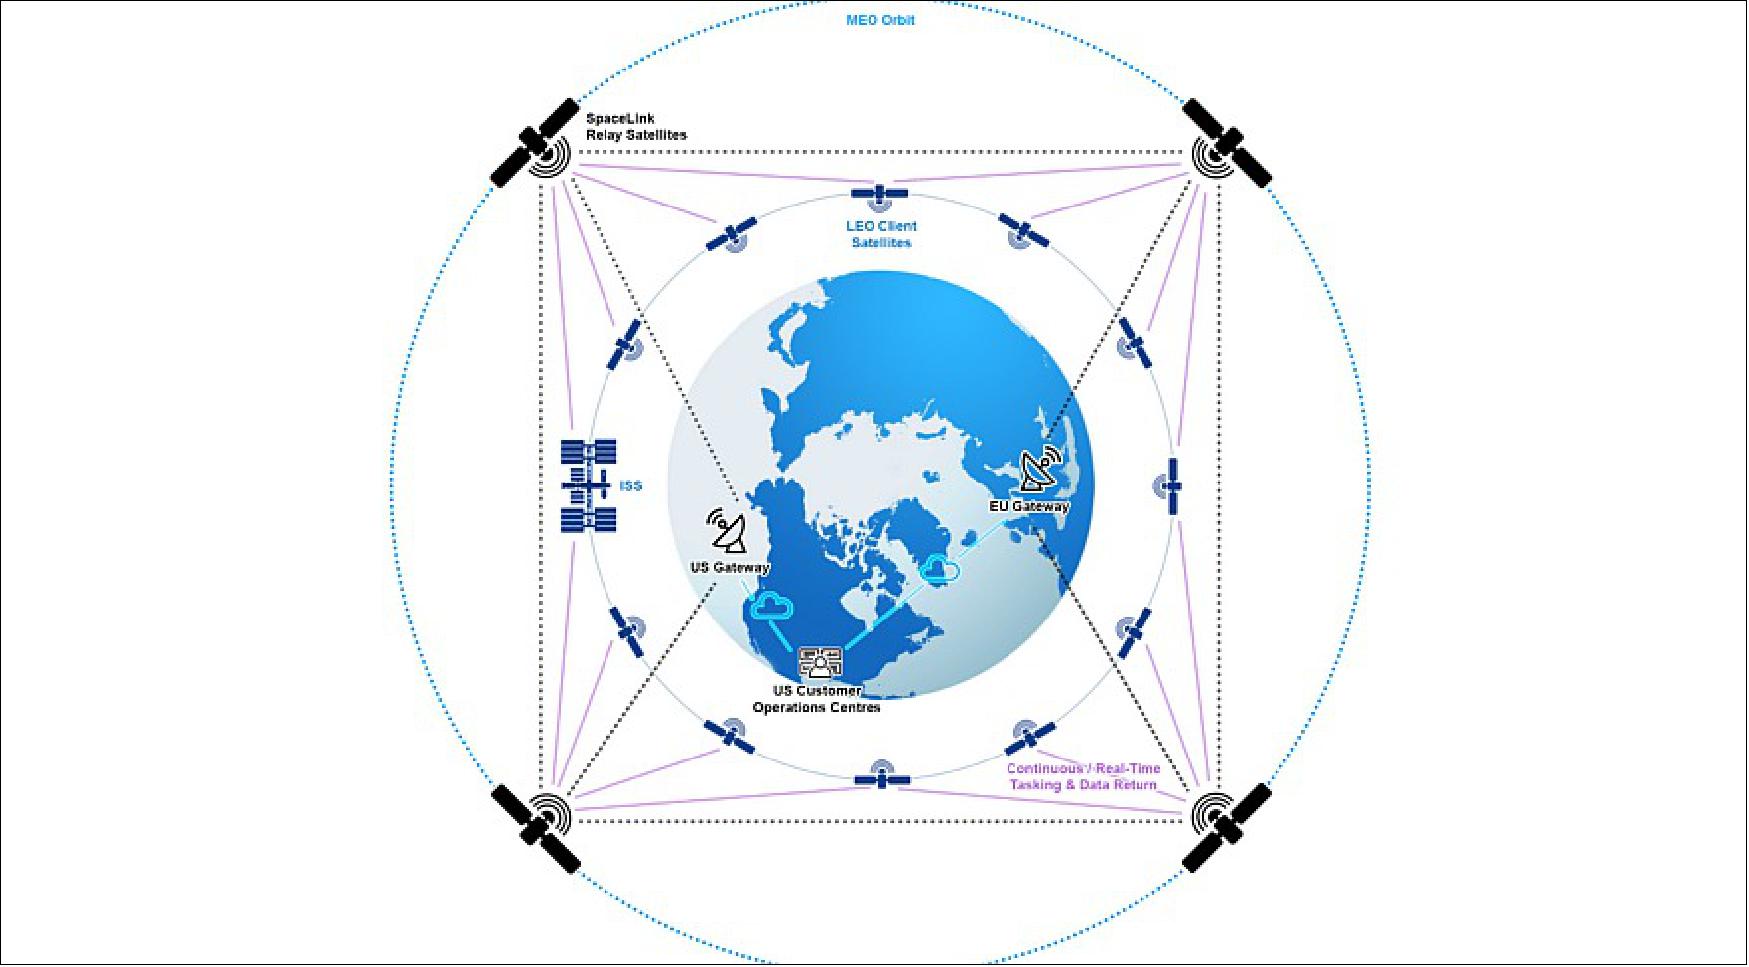 Figure 3: SpaceLink's constellation aims to continuously transmit user data to the ground for immediate access via the internet, private cloud, or other secure delivery (image credit: SpaceLink)